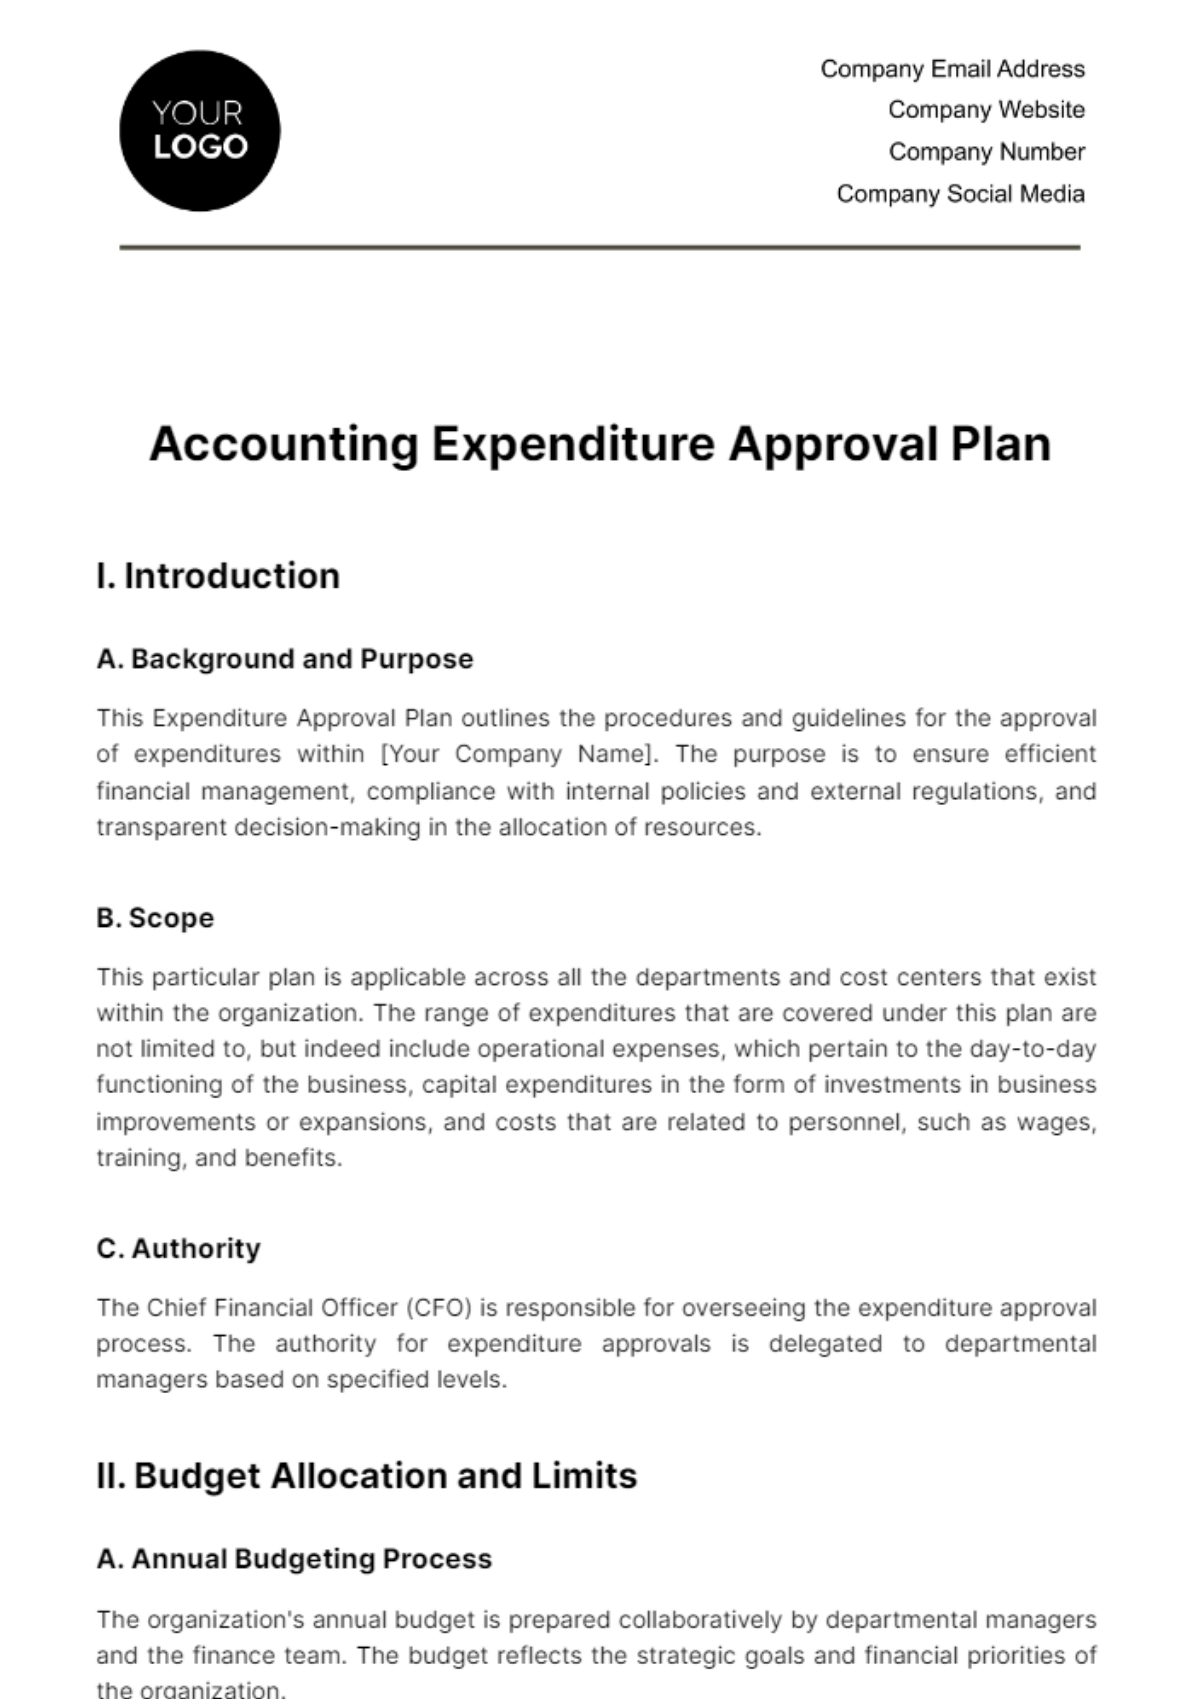 Accounting Expenditure Approval Plan Template